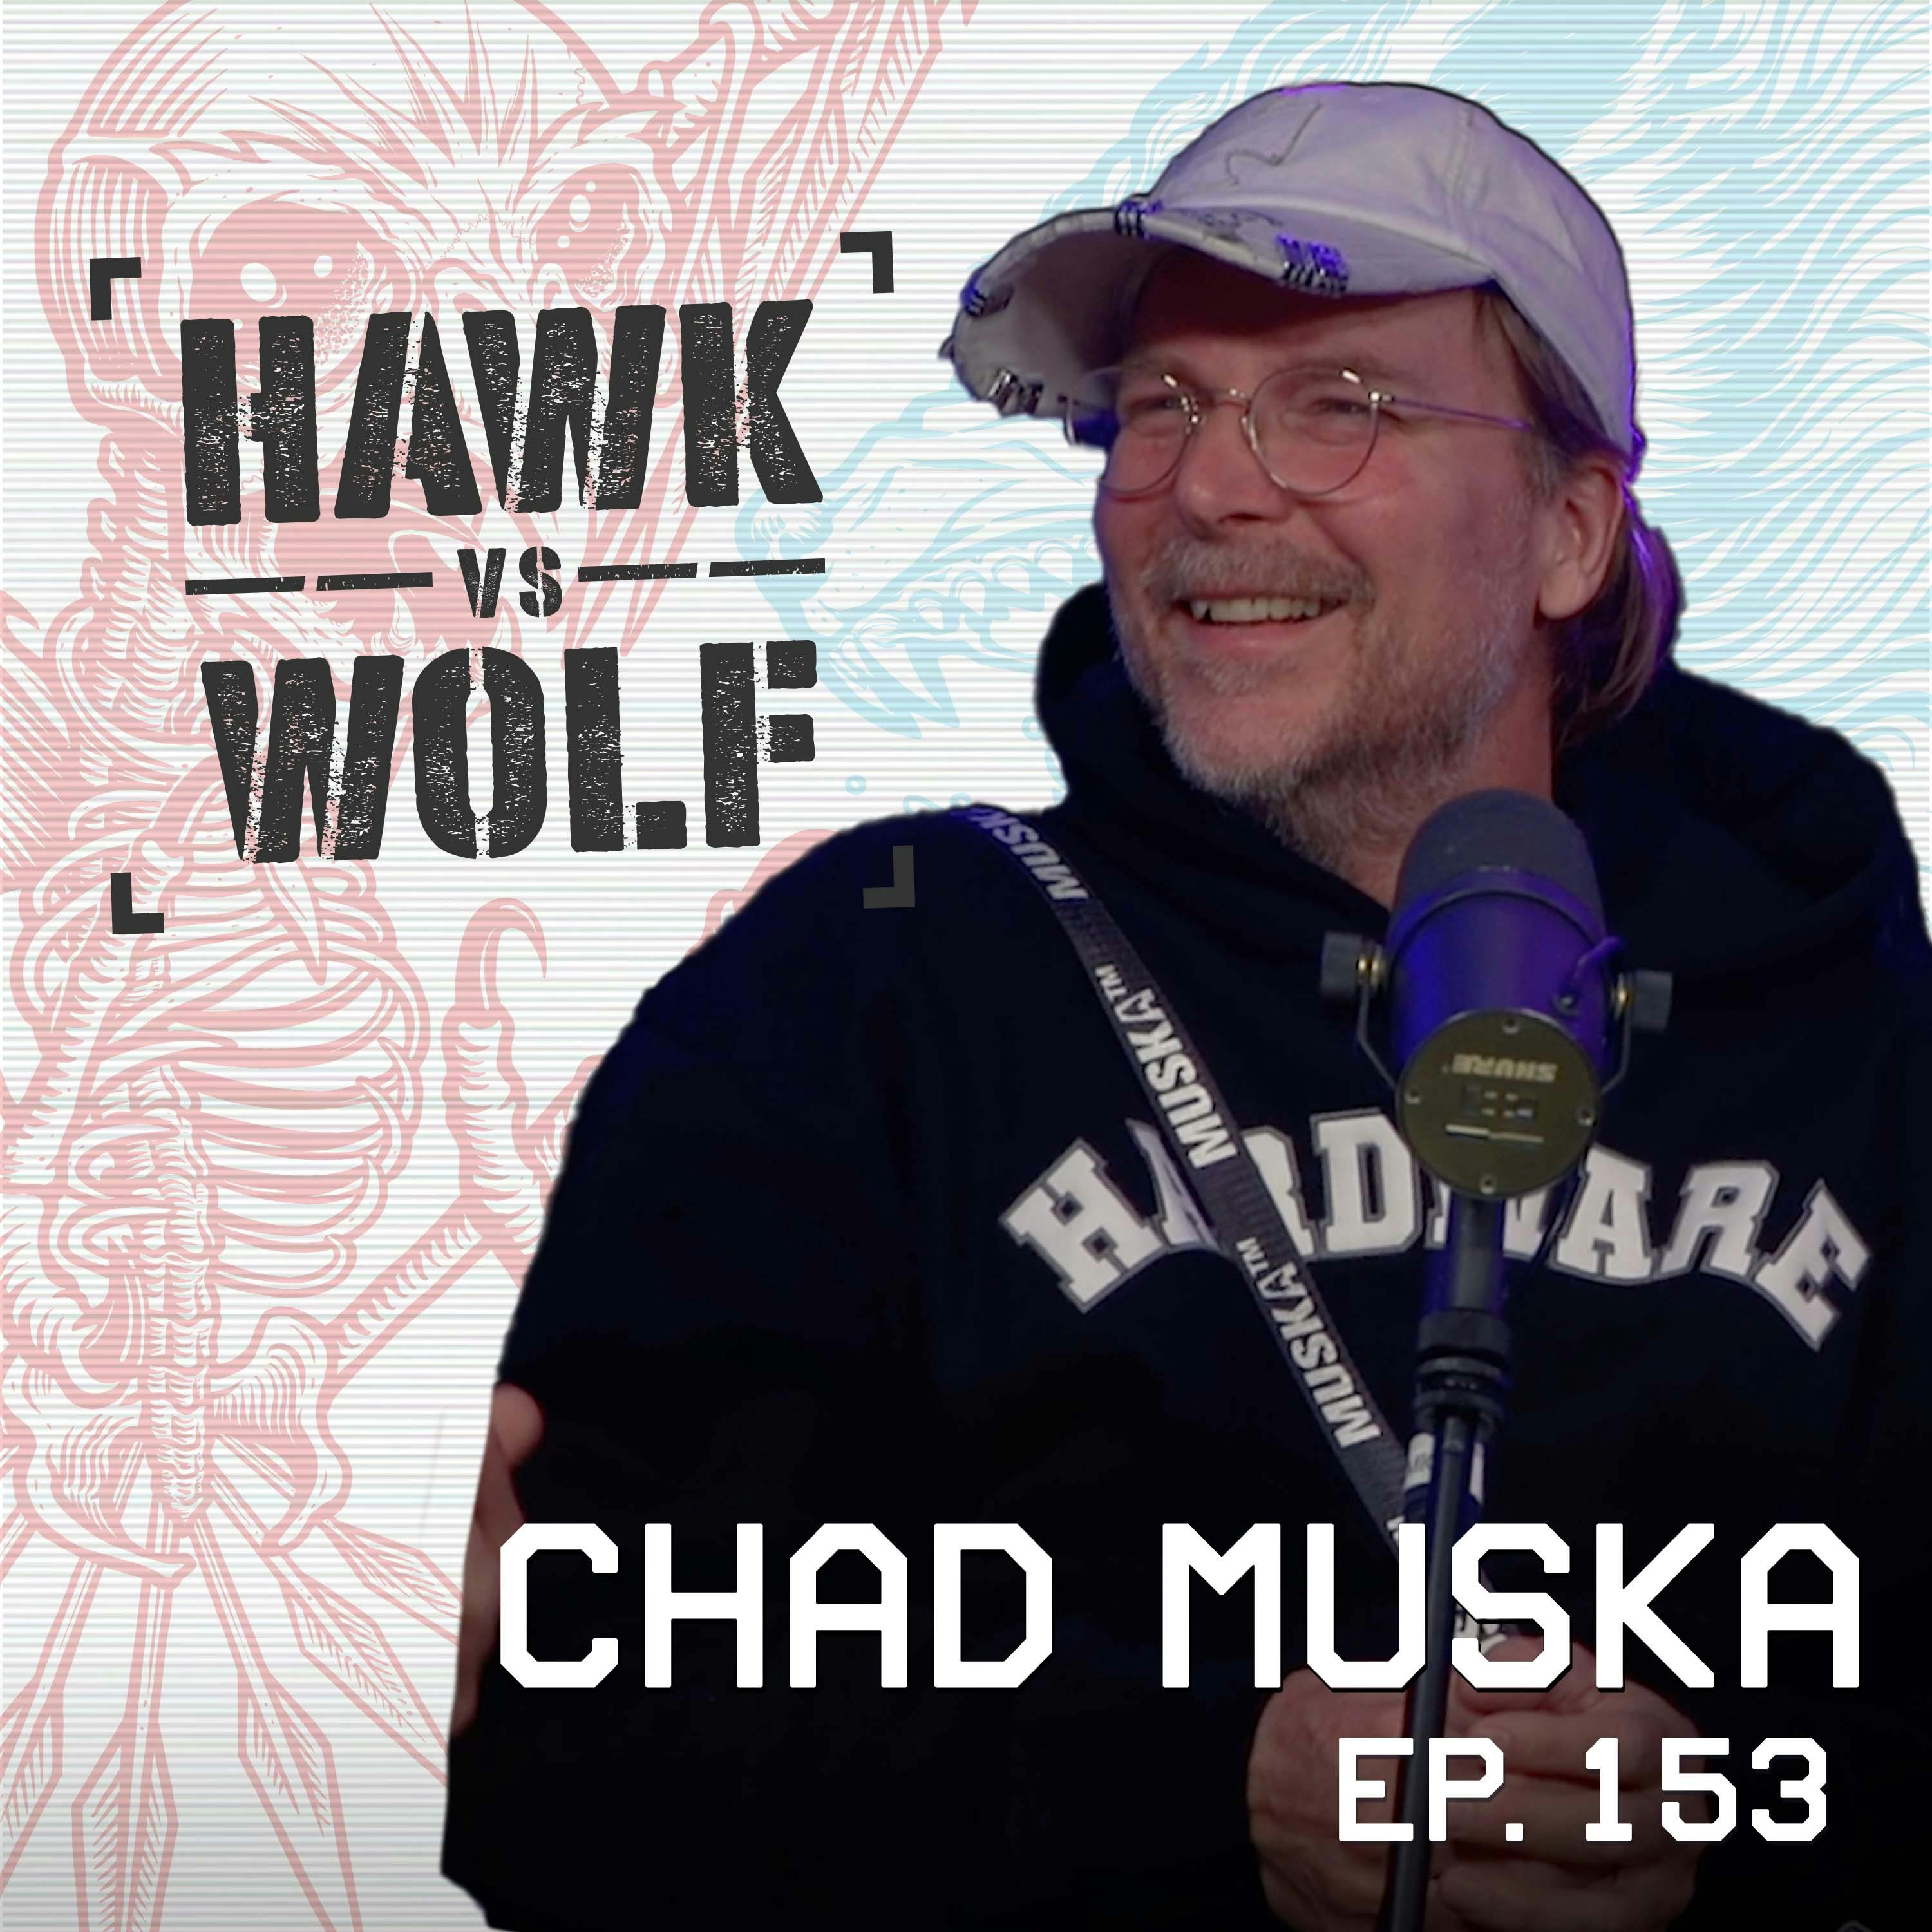 Chad Muska is Back! Skateboarding, Solitude, Intuition & Chickens